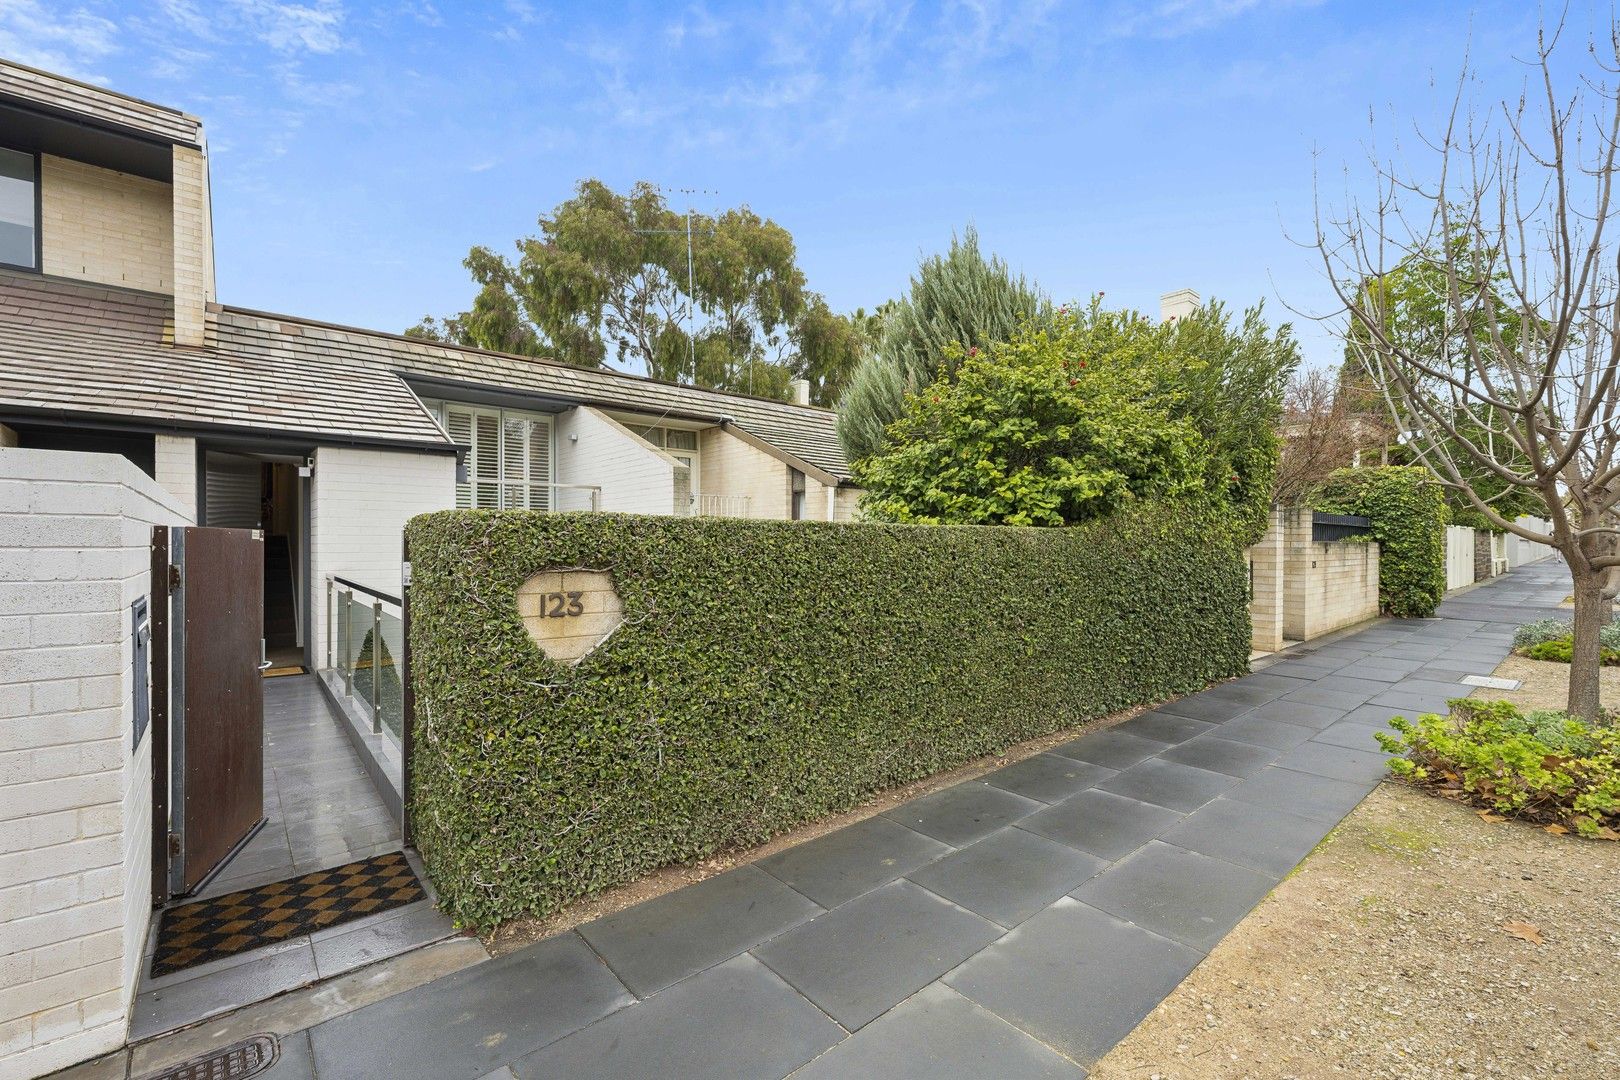 123 Brougham Place, North Adelaide SA 5006, Image 0